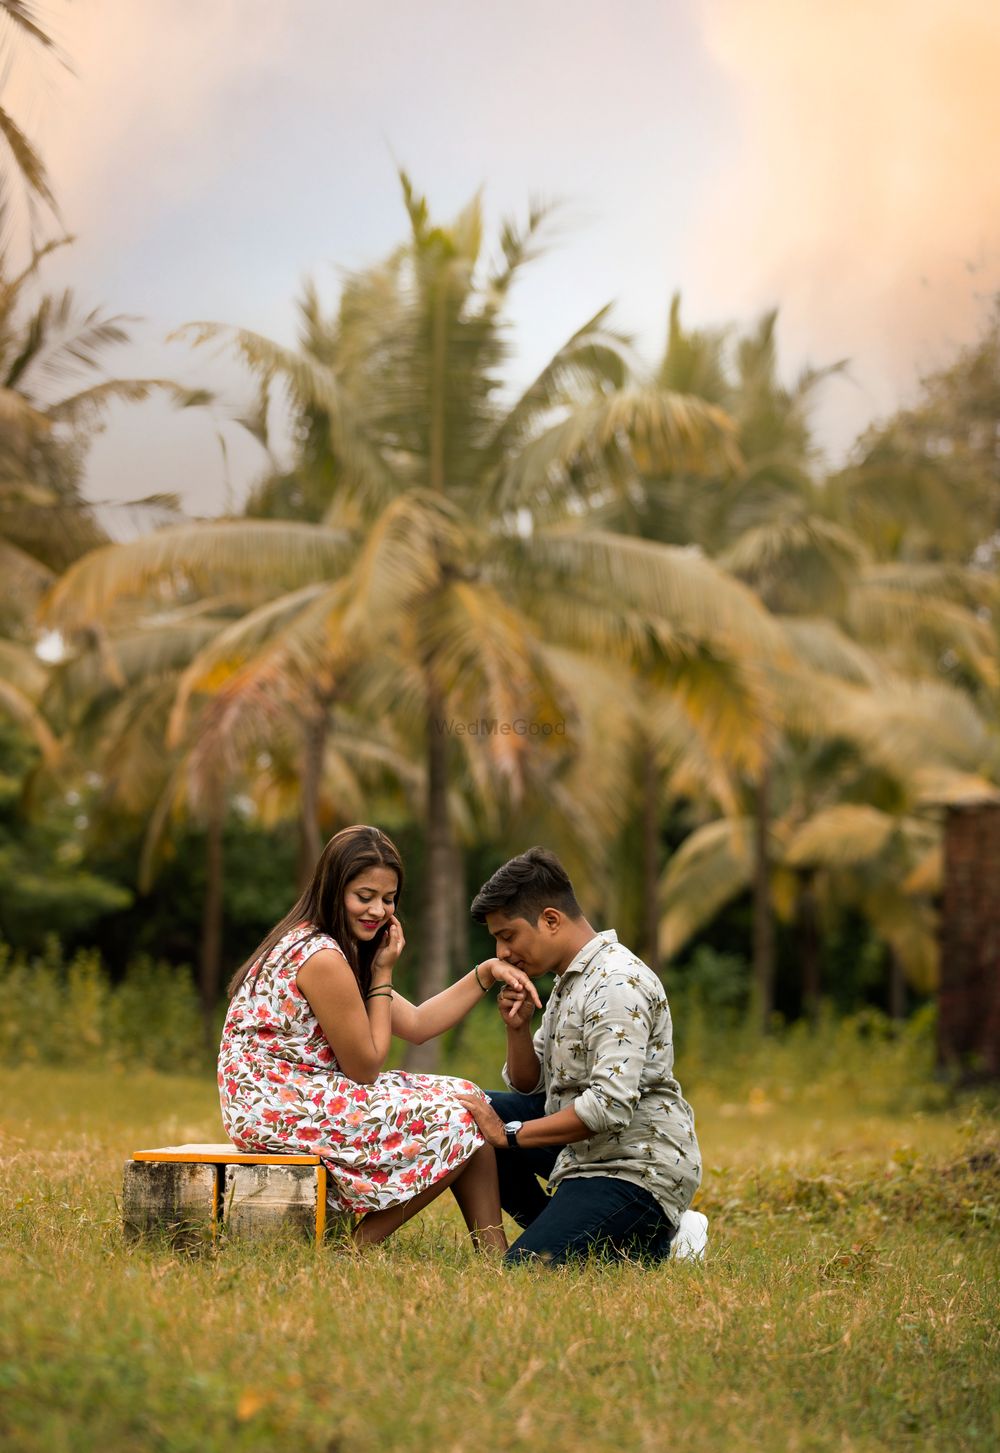 Photo From Dattaprasad & Shweta - By The Happy Pixel